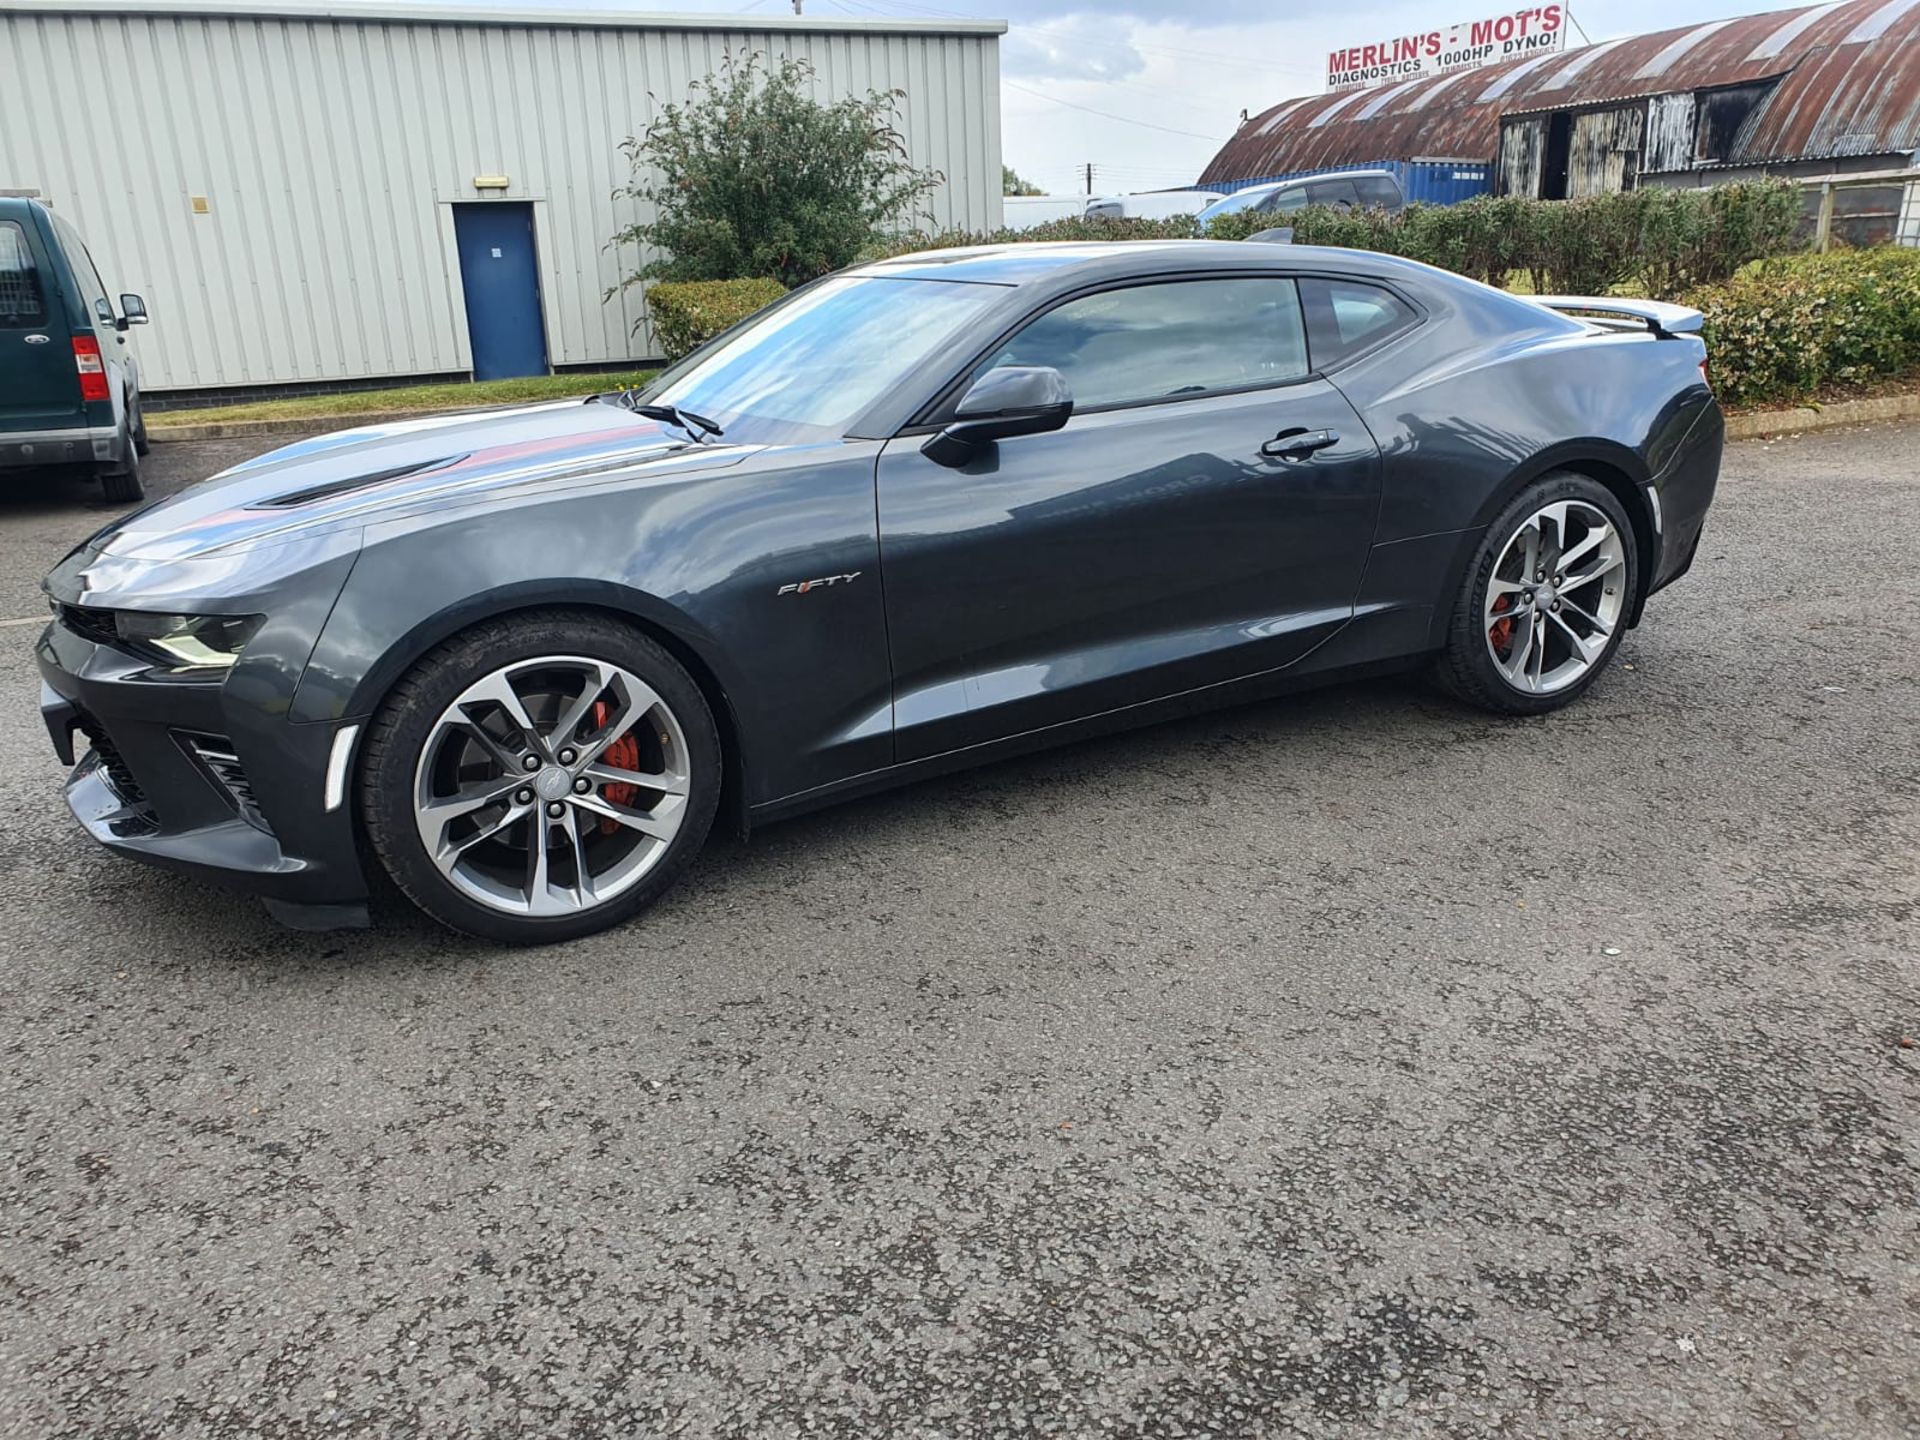 2017/17 REG CHEVROLET CAMARO V8 AUTOMATIC GREY COUPE 50th ANNIVERSARY EDITION, LHD, LOW MILEAGE - Image 5 of 43